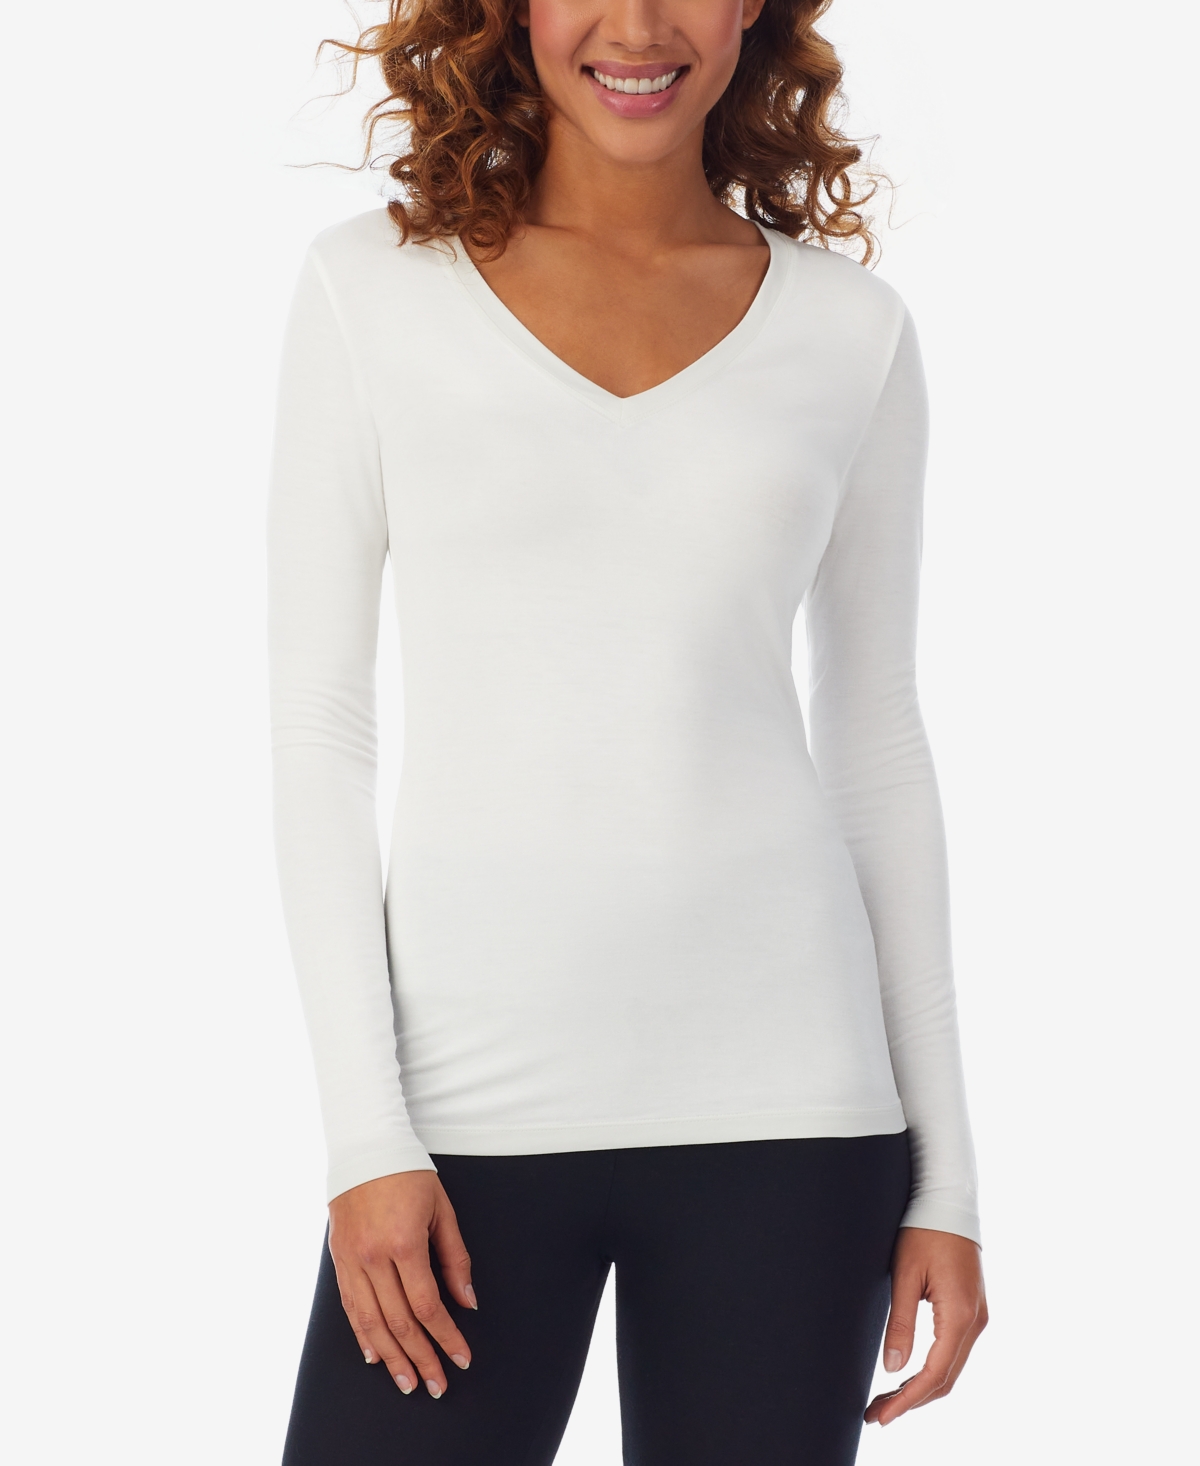 Cuddl Duds Women's Softwear V-neck Long-sleeve Layering Top In Ivory